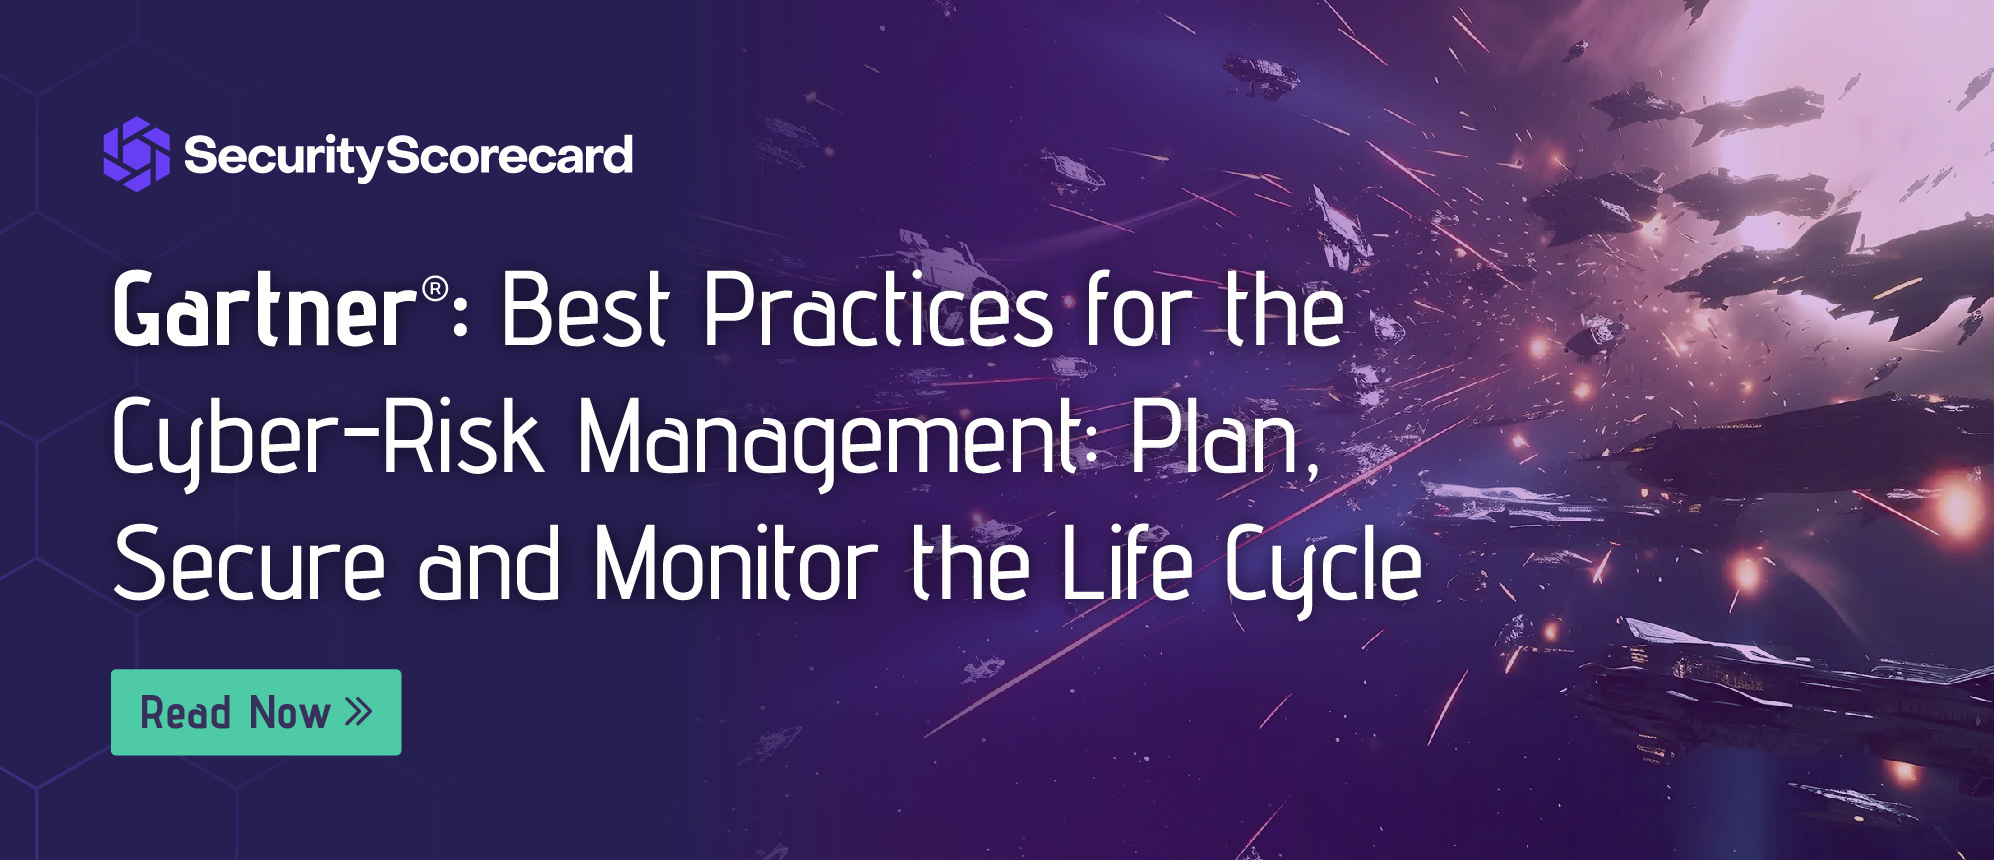 Gartner: Best Practices for the Cyber-Risk Management: Plan, Secure and Monitor the Life Cycle